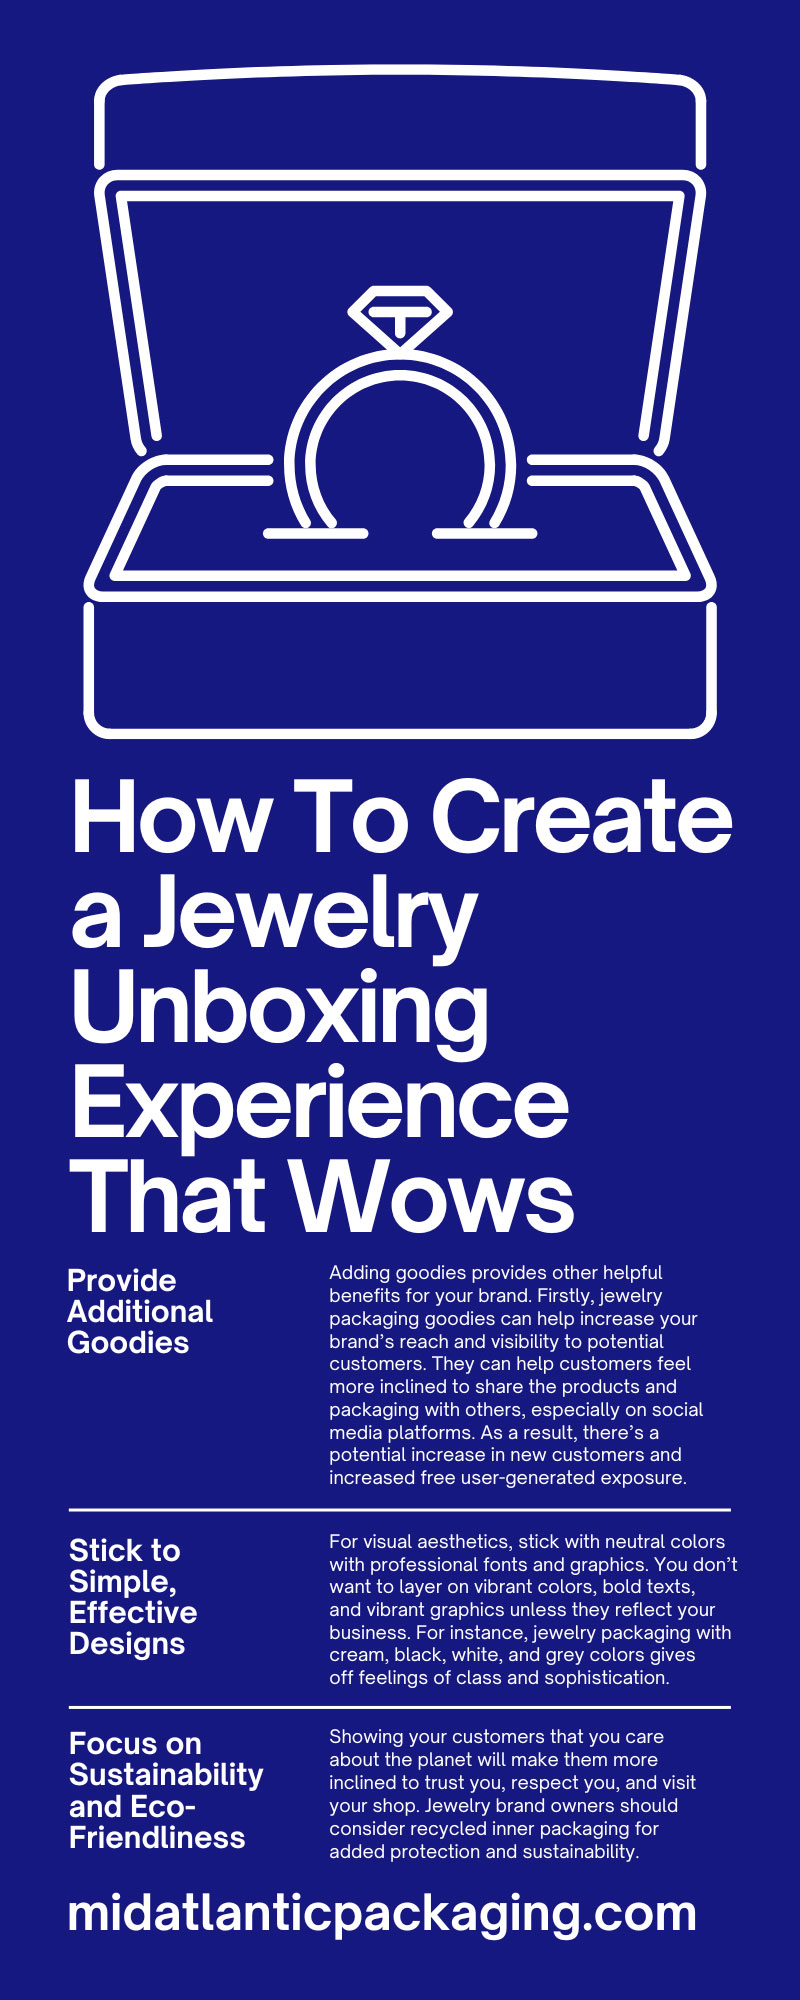 How To Create a Jewelry Unboxing Experience That Wows